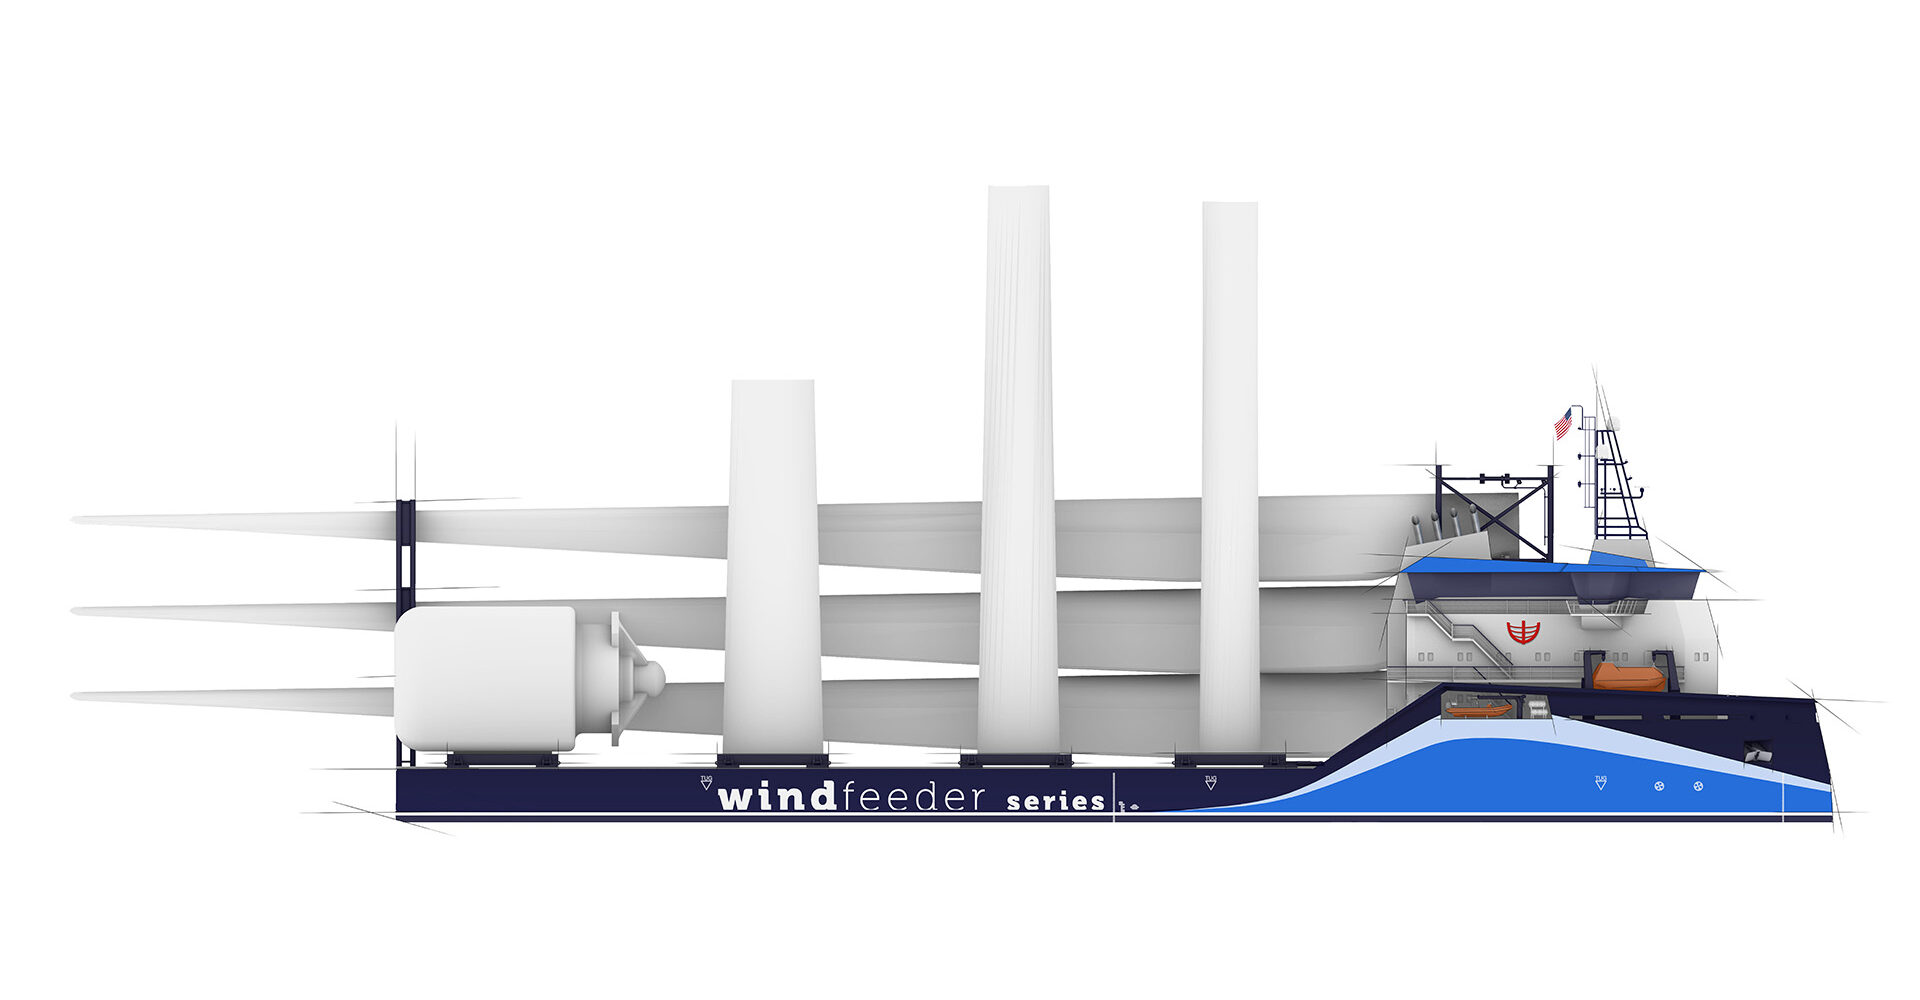 C-Job and Ampelmann offshore wind feeder vessel side view